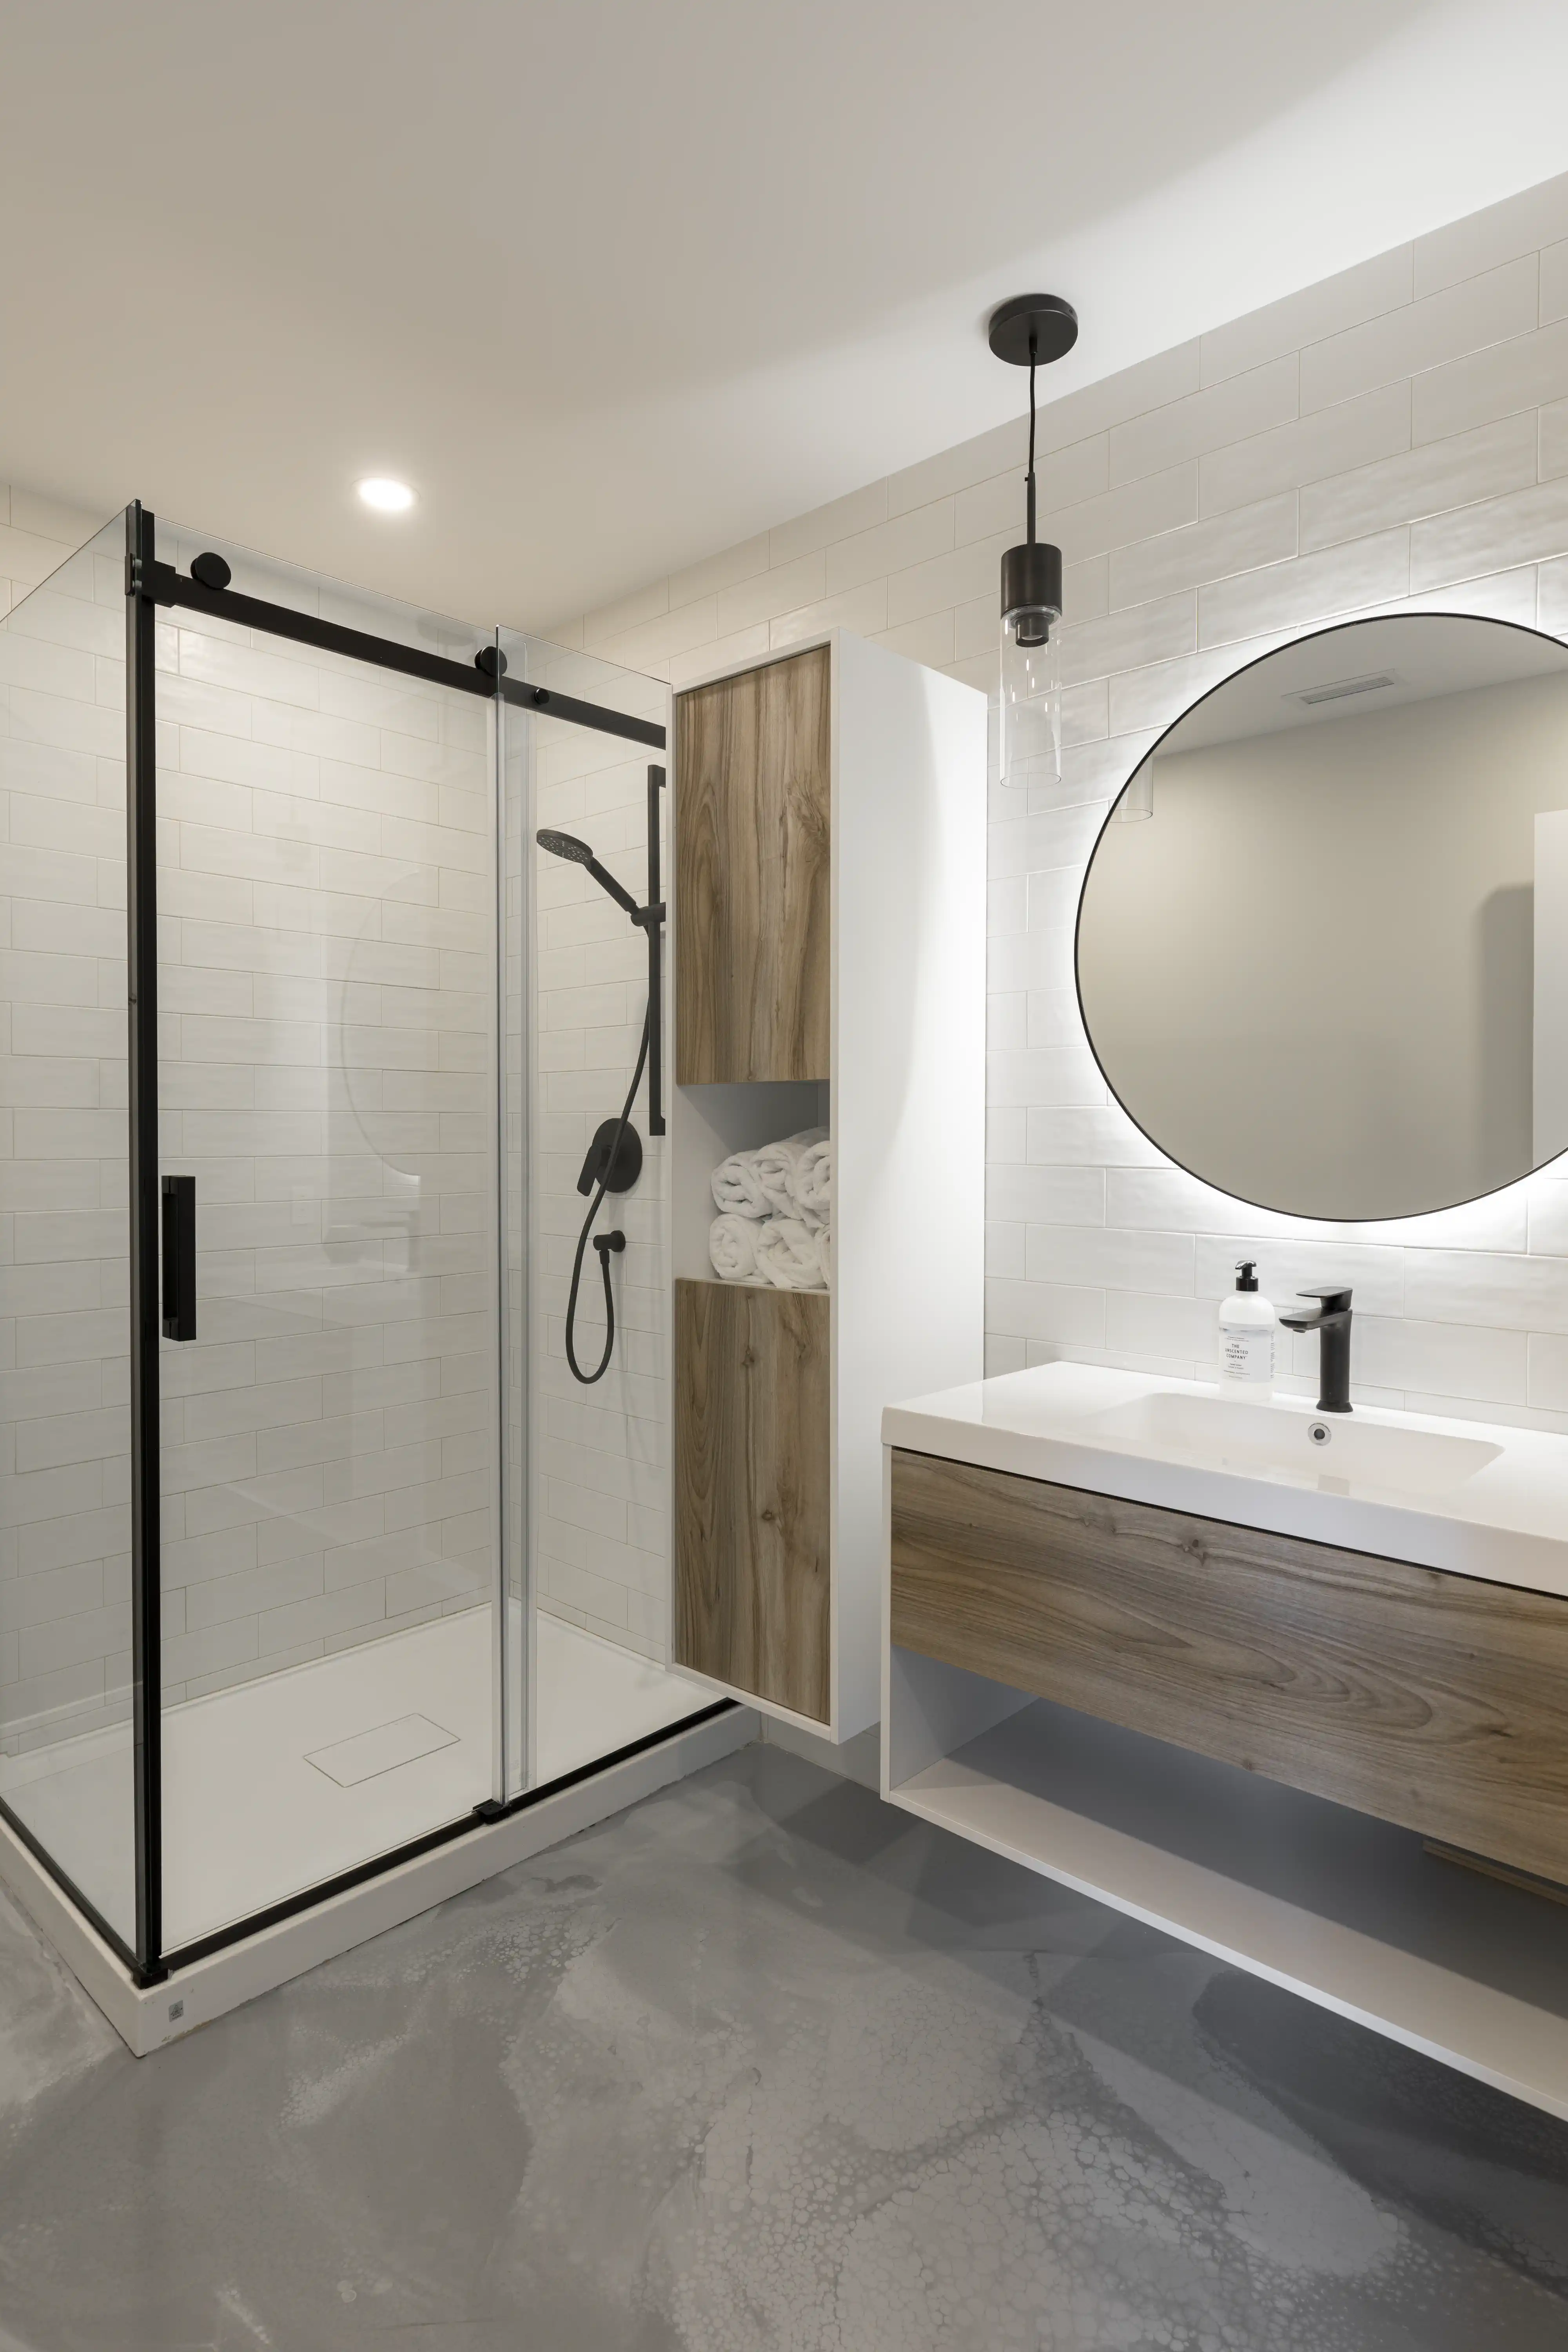 A modern bathroom with a shower and a sink in white and gray tones, interior by Sarah Brown Design